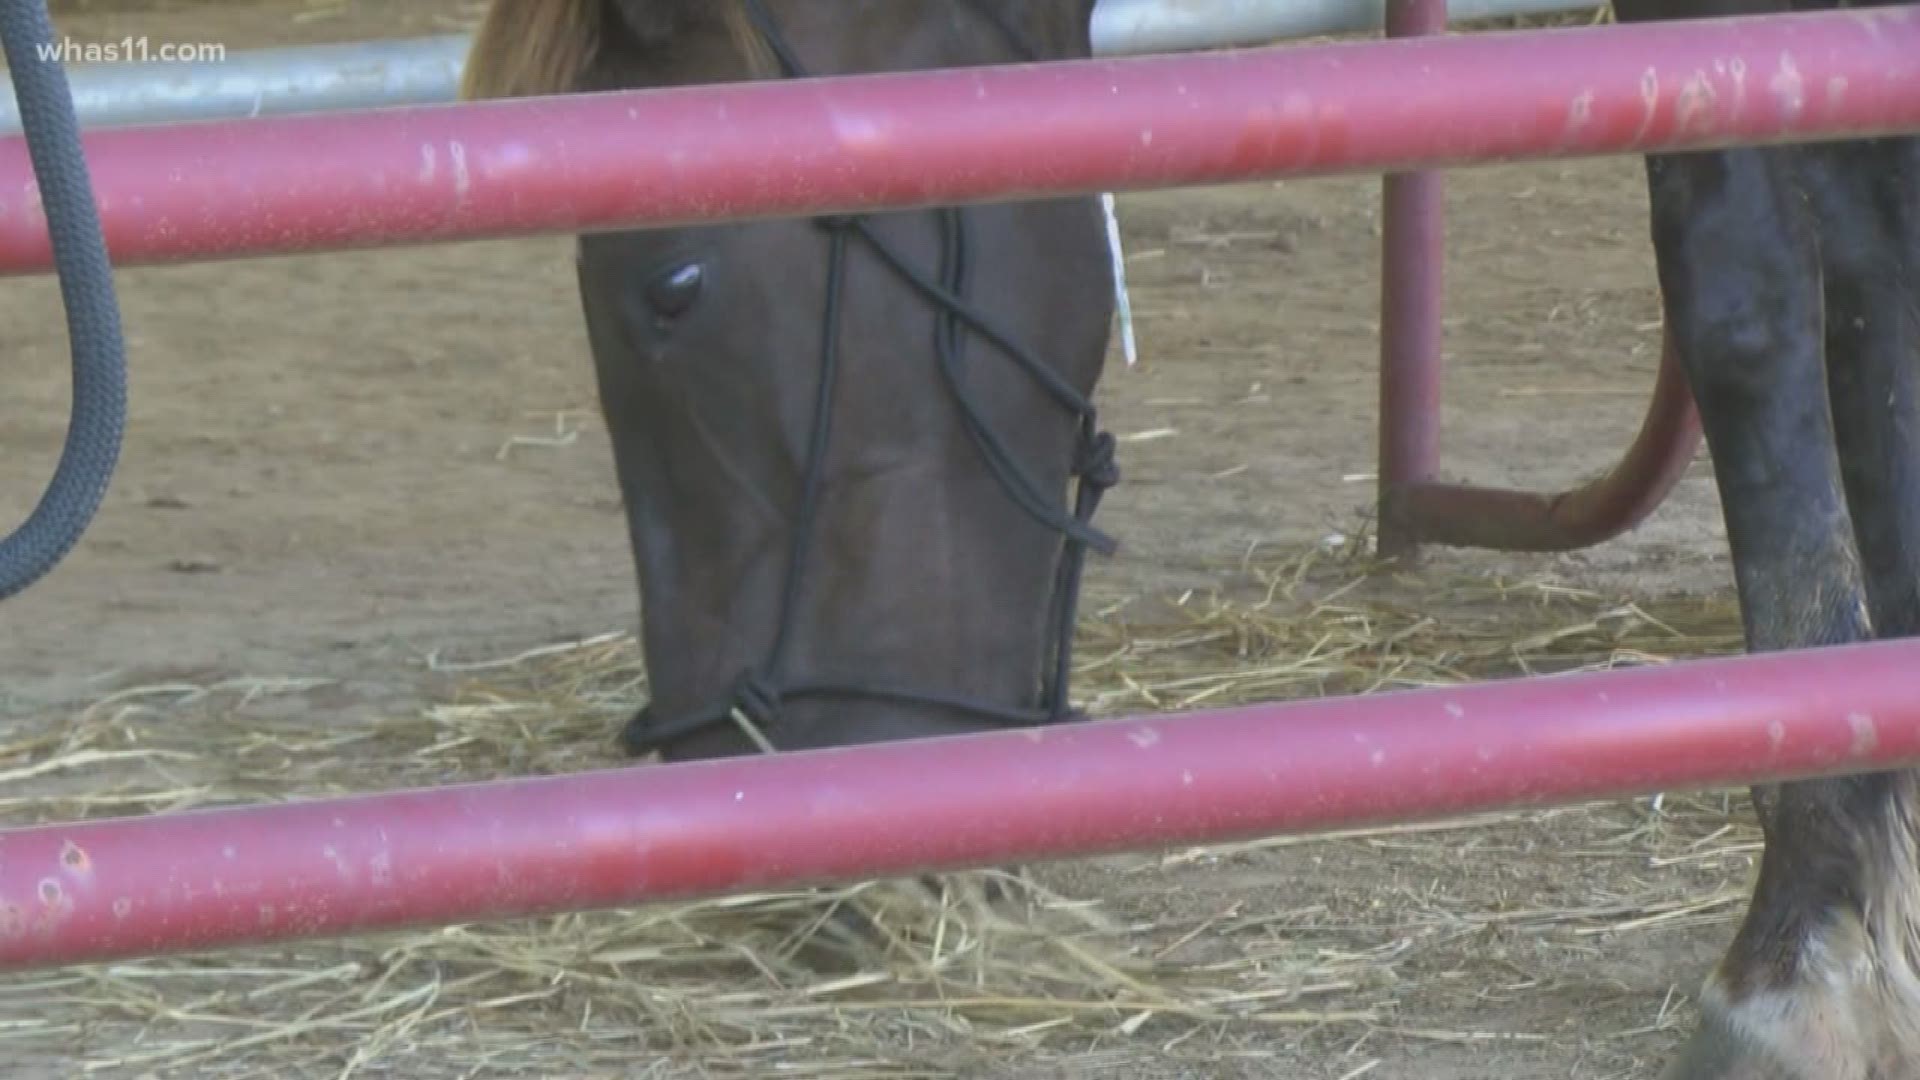 Twenty-one horses have been surrendered by owners who can no longer care for them to an organization that specializes in horse adoptions.